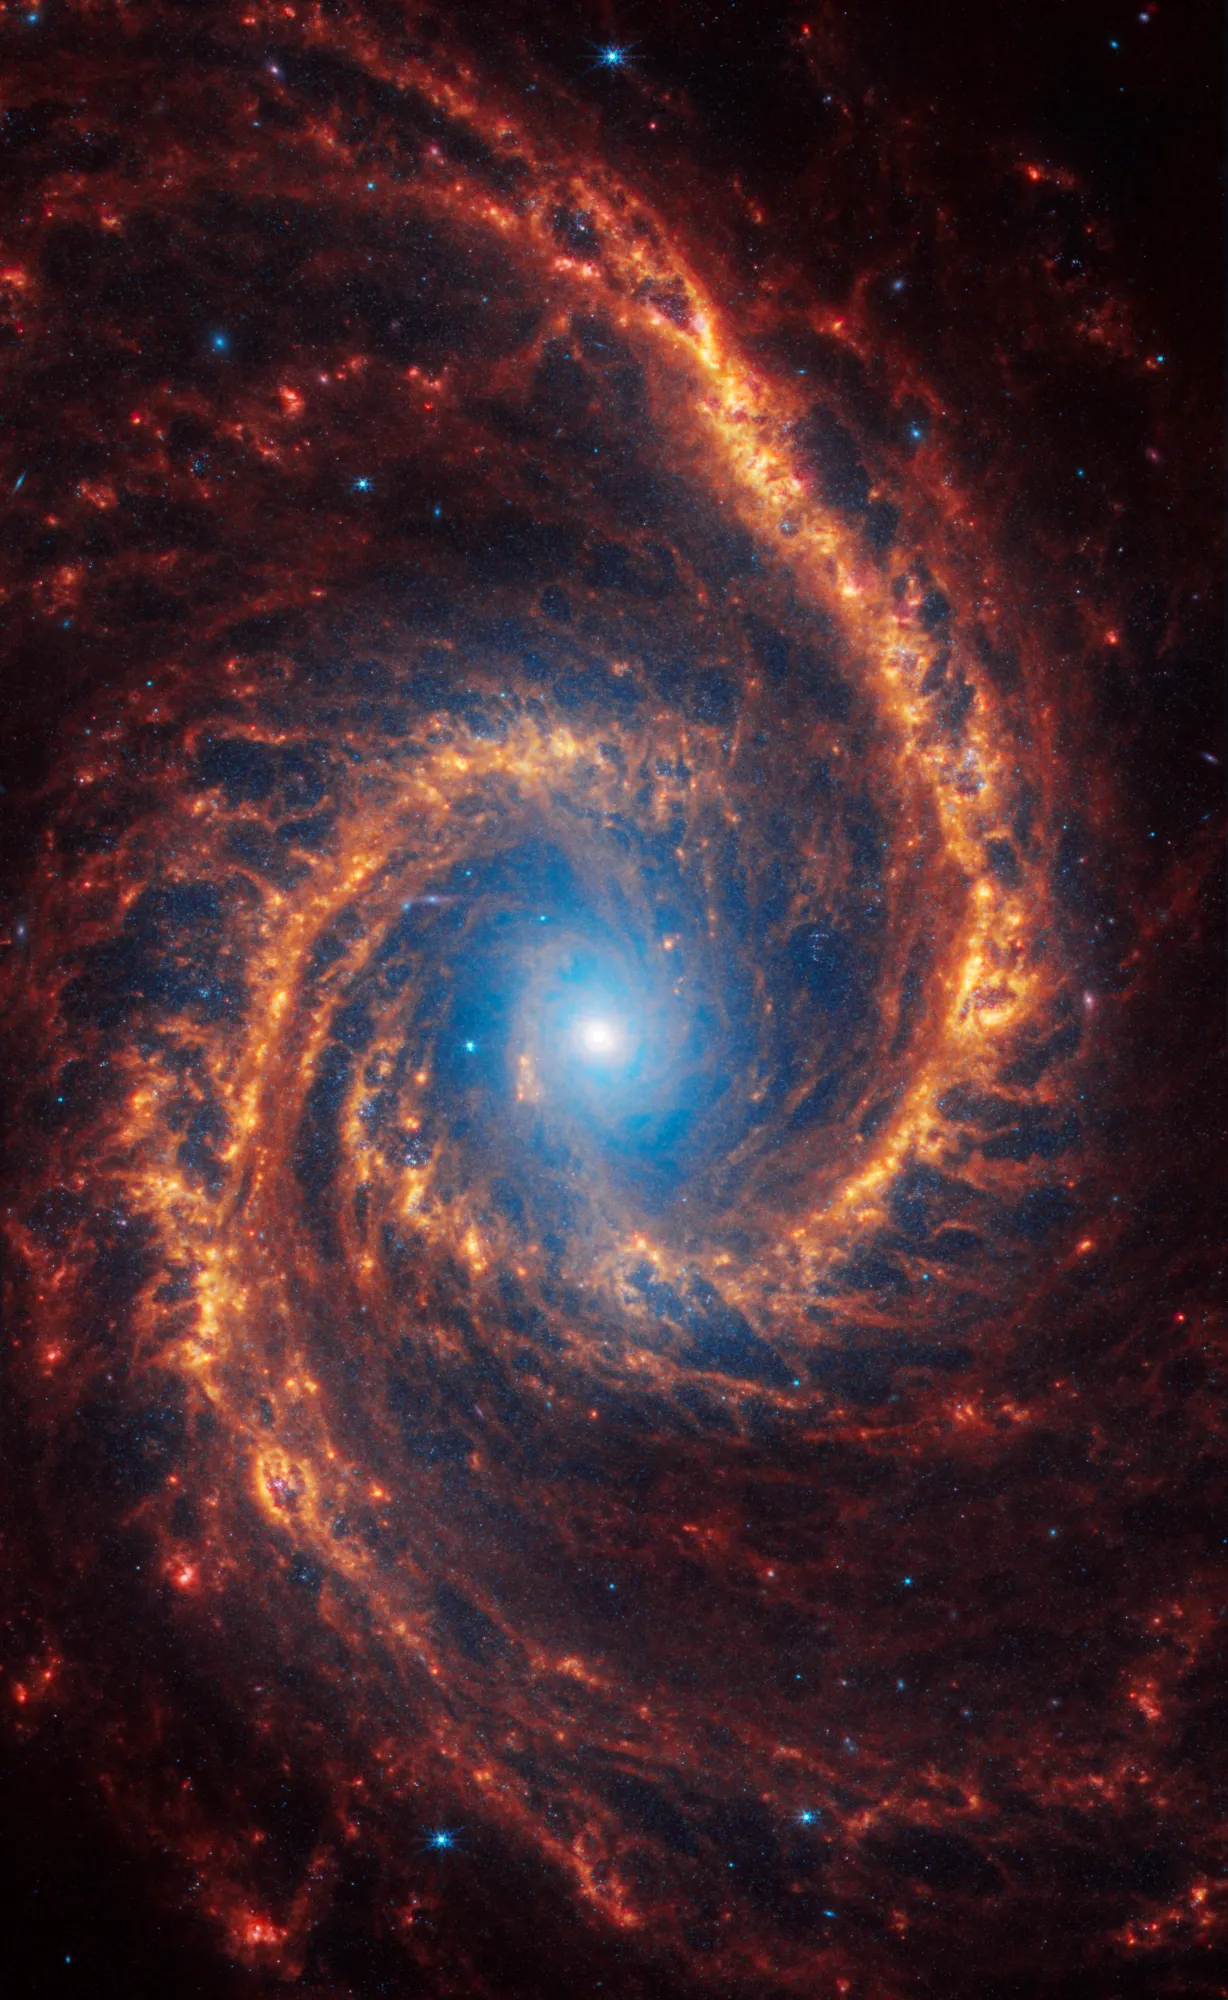 Spiral galaxy NGC 1566 is 60 million light-years away in the constellation Dorado.